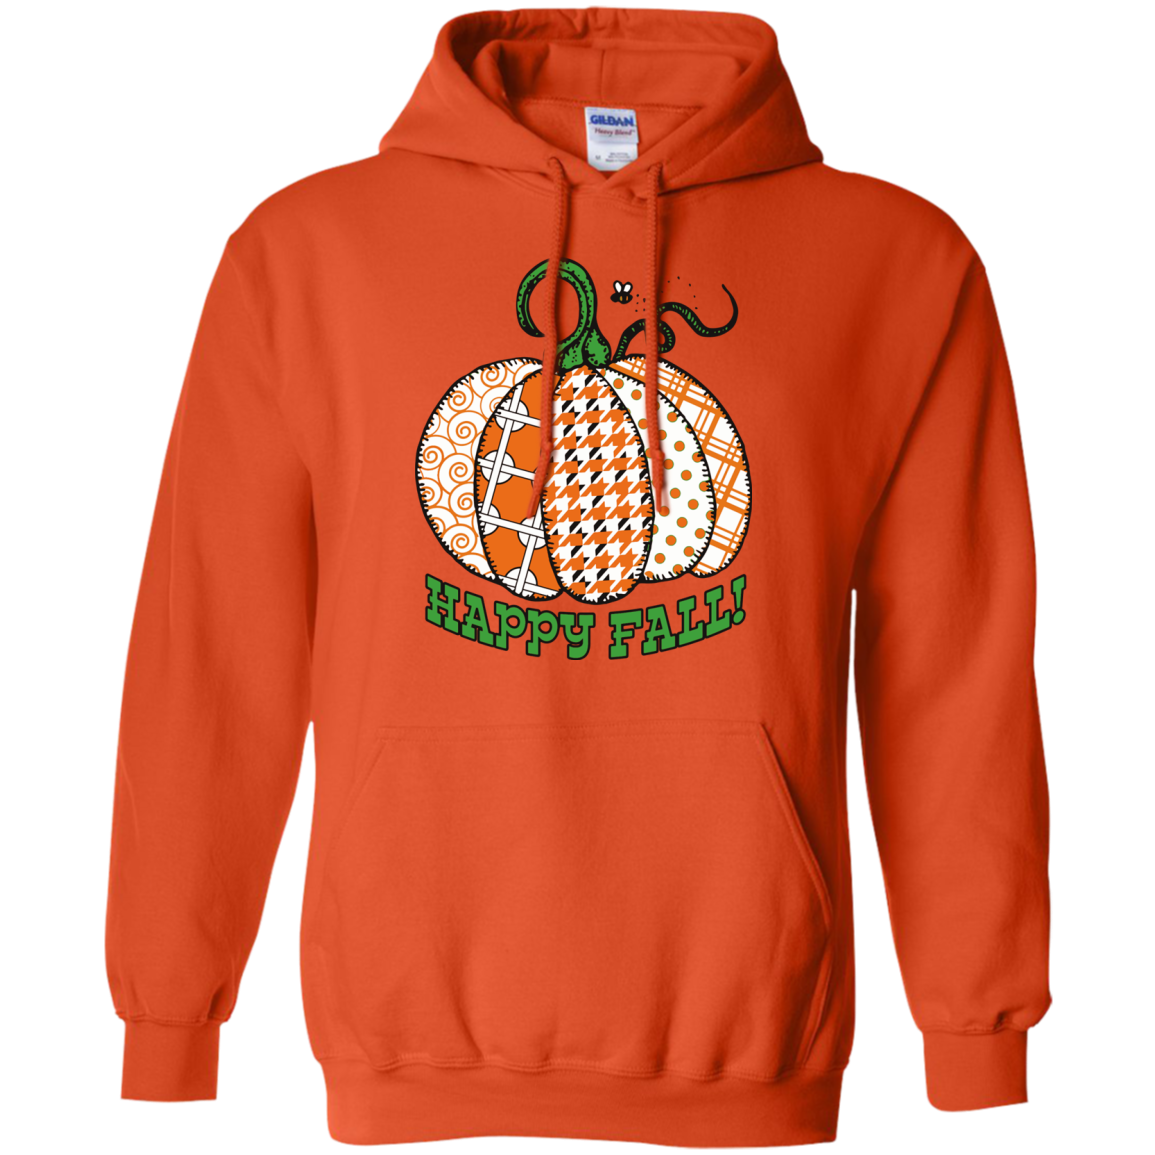 Happy Fall! Pullover Hoodies - Crafter4Life - 1